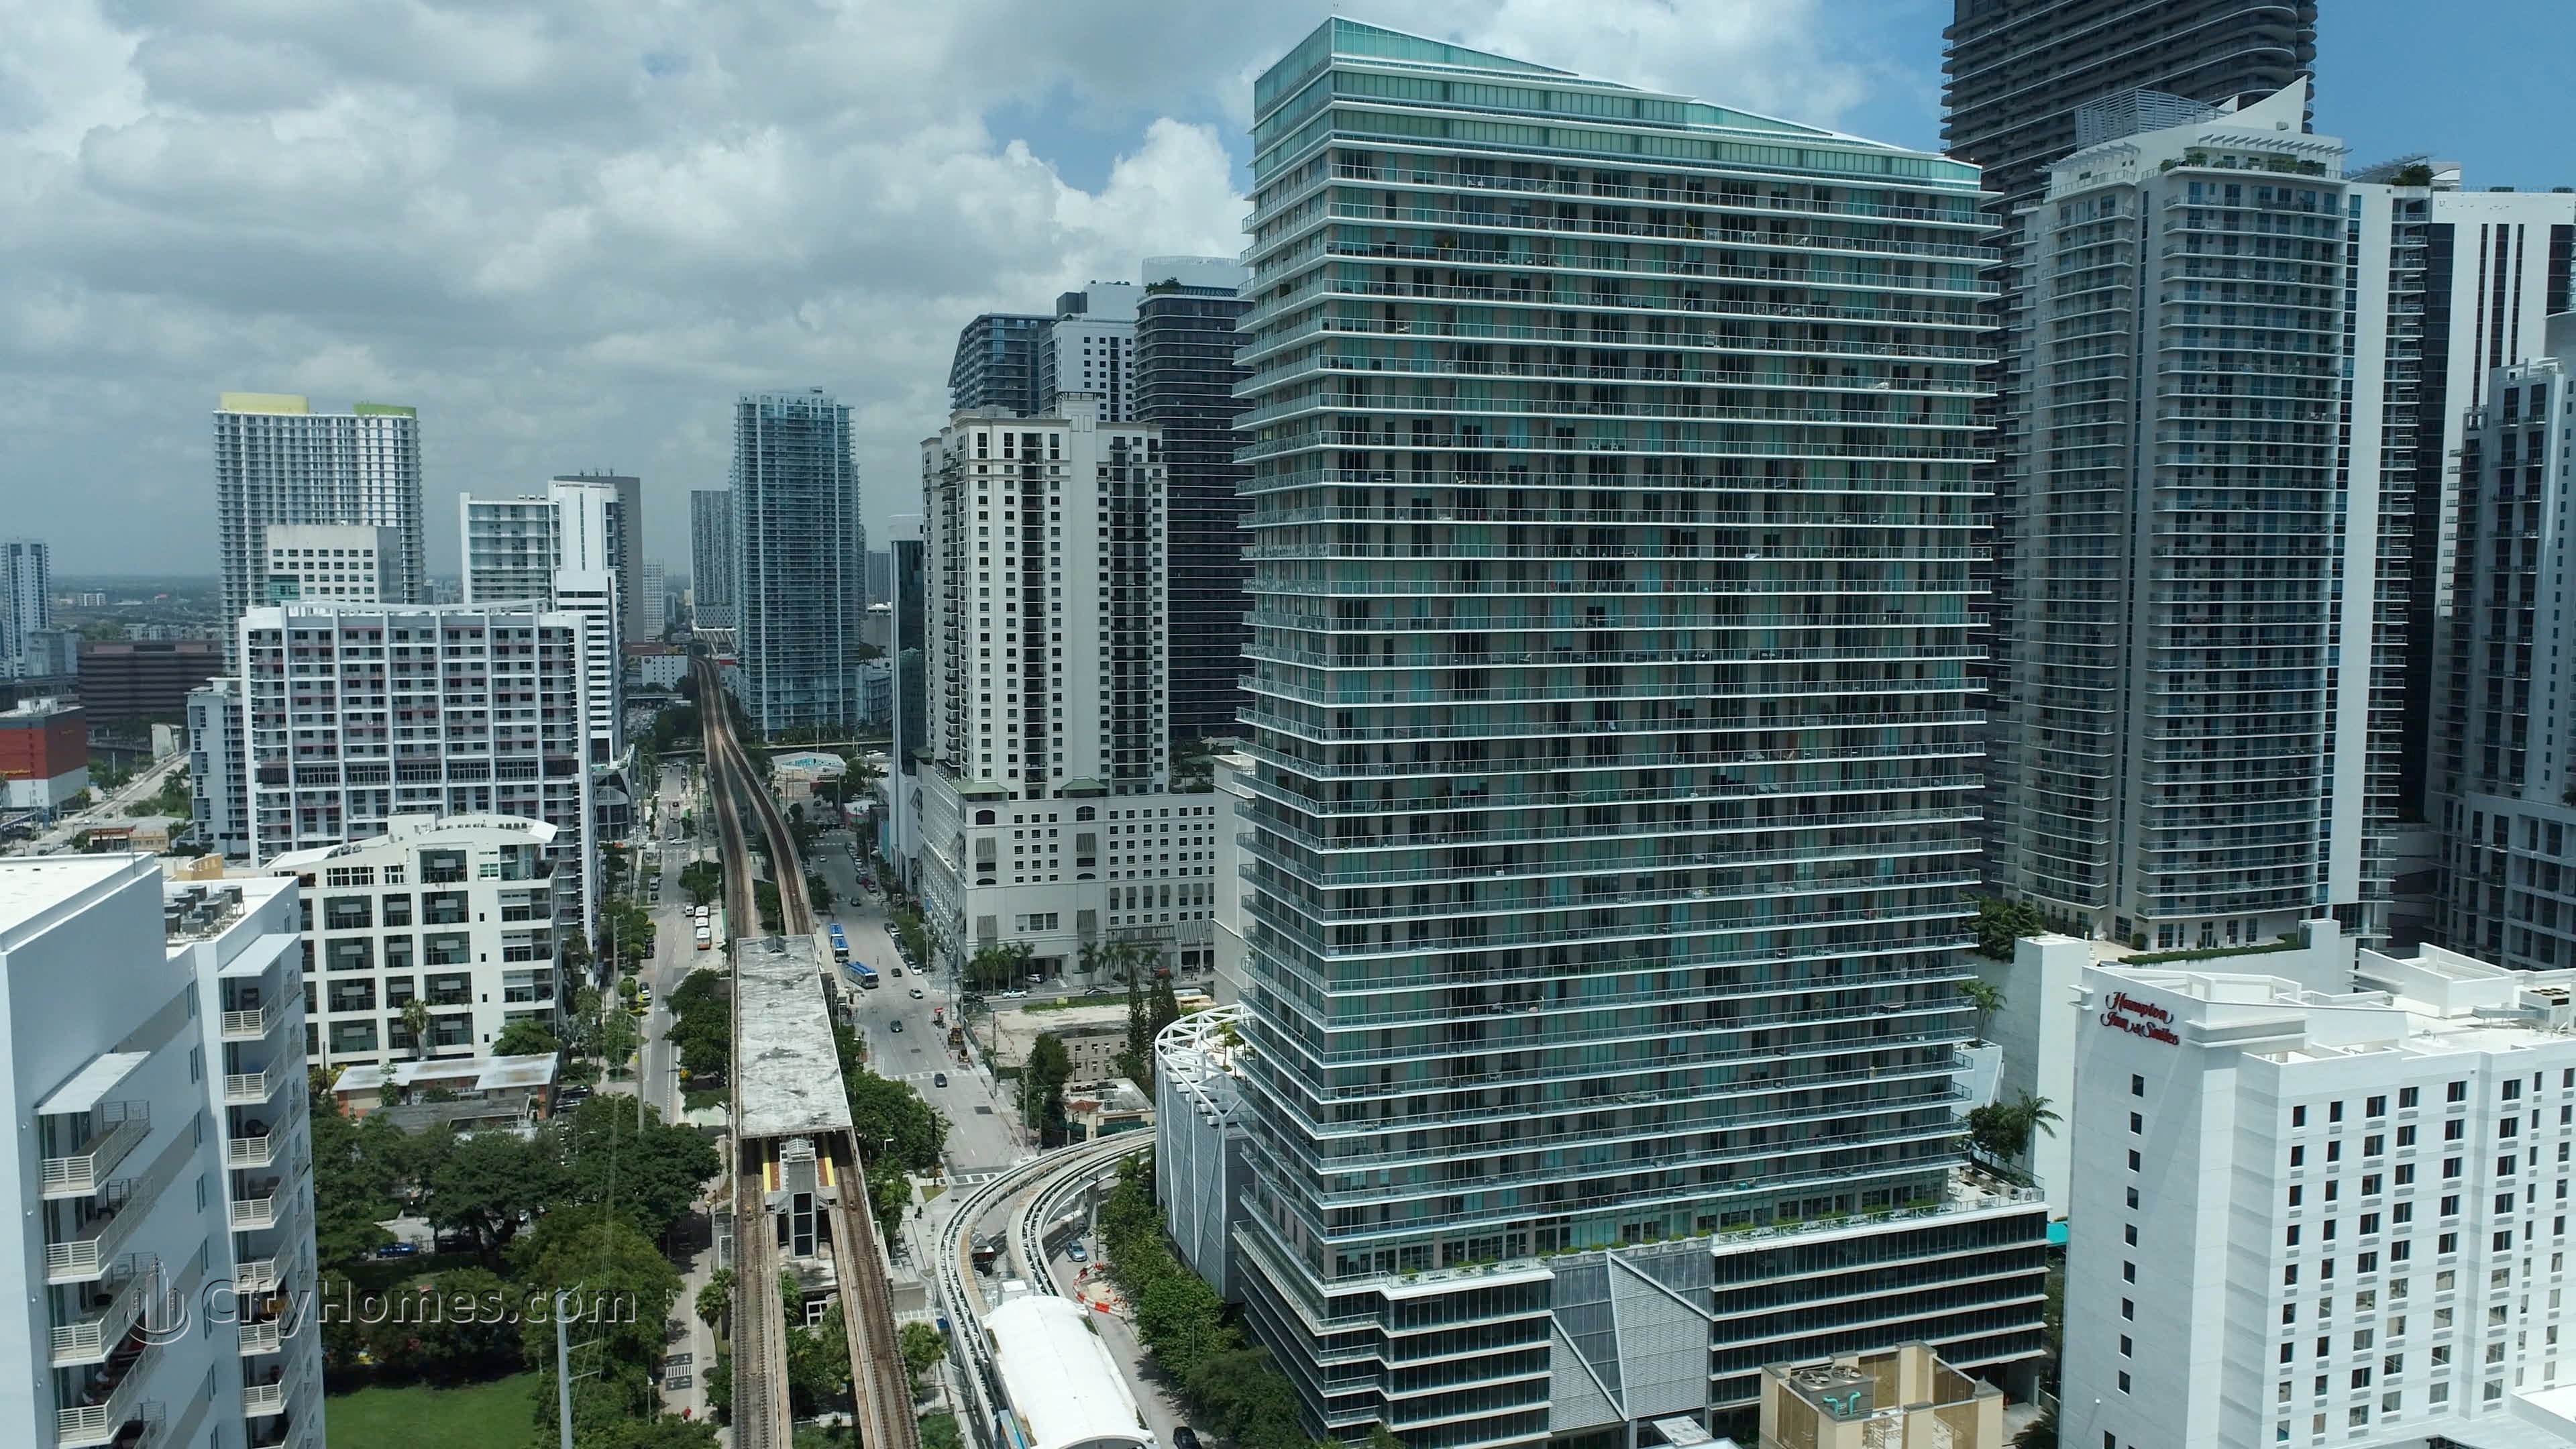 79 SW 12th Street, Brickell, Miami, FL 33130에 Axis - South Tower 건물